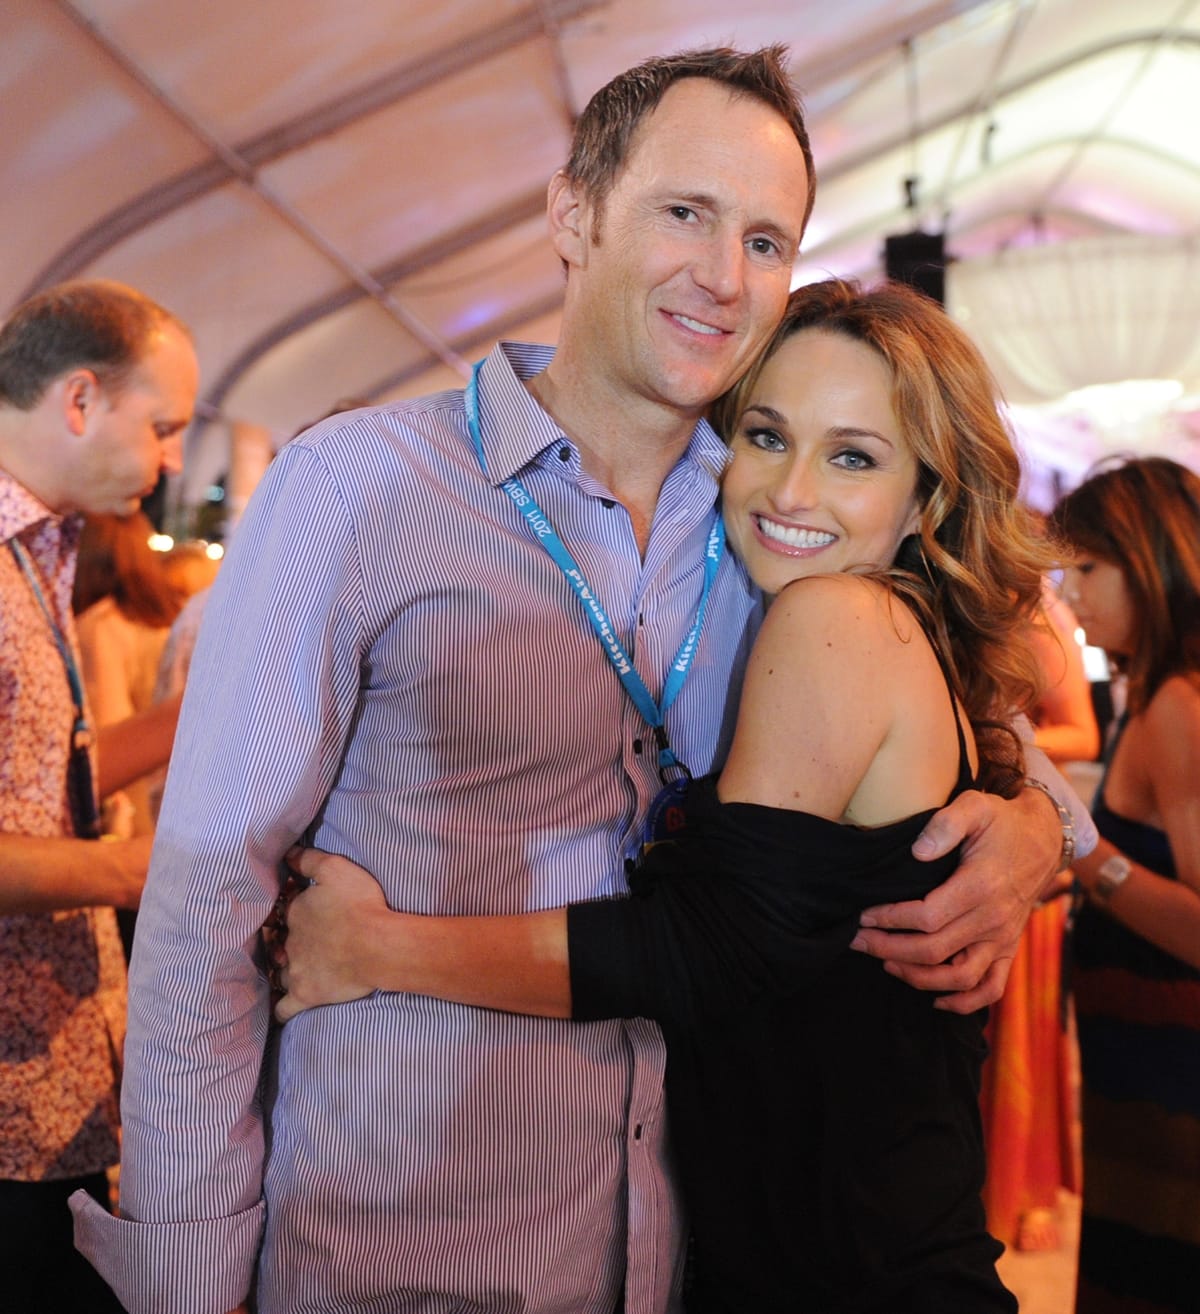 Celebrity chef and Today guest co-host Giada De Laurentiis with her husband Todd Thompson